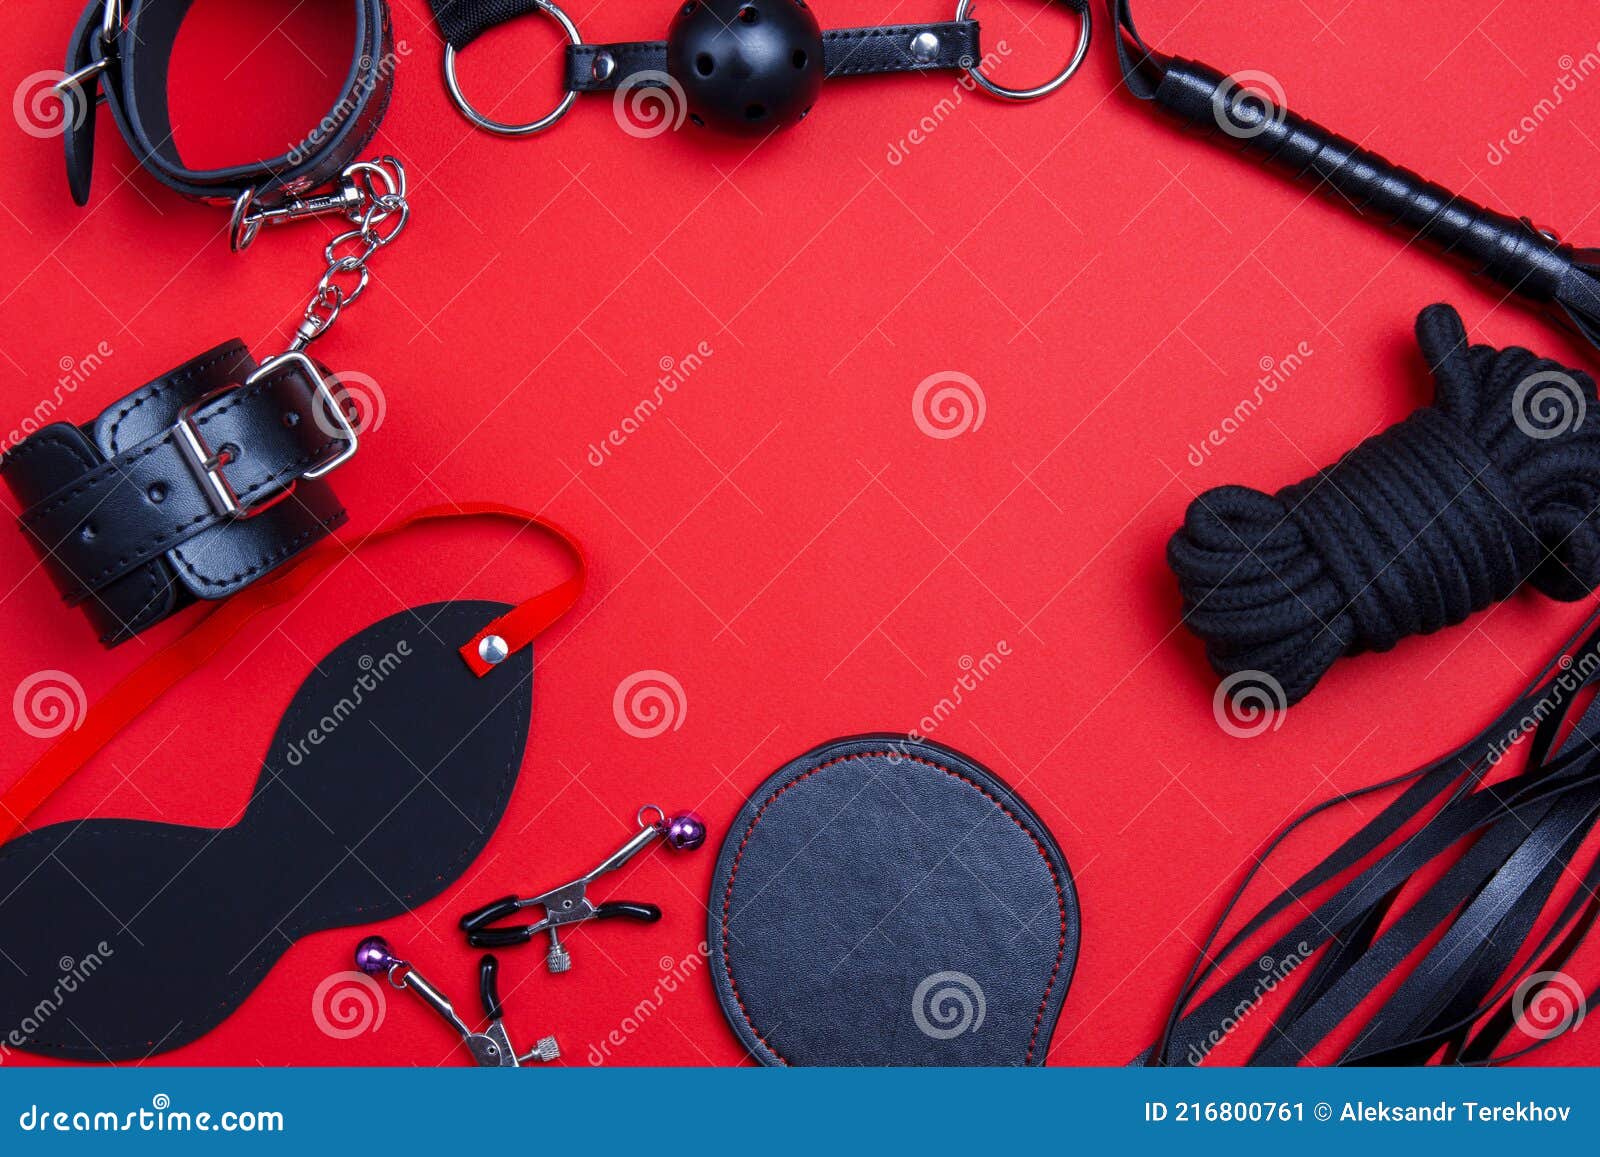 BDSM Toys for Sex and Punishment in Form a Frame Stock Image